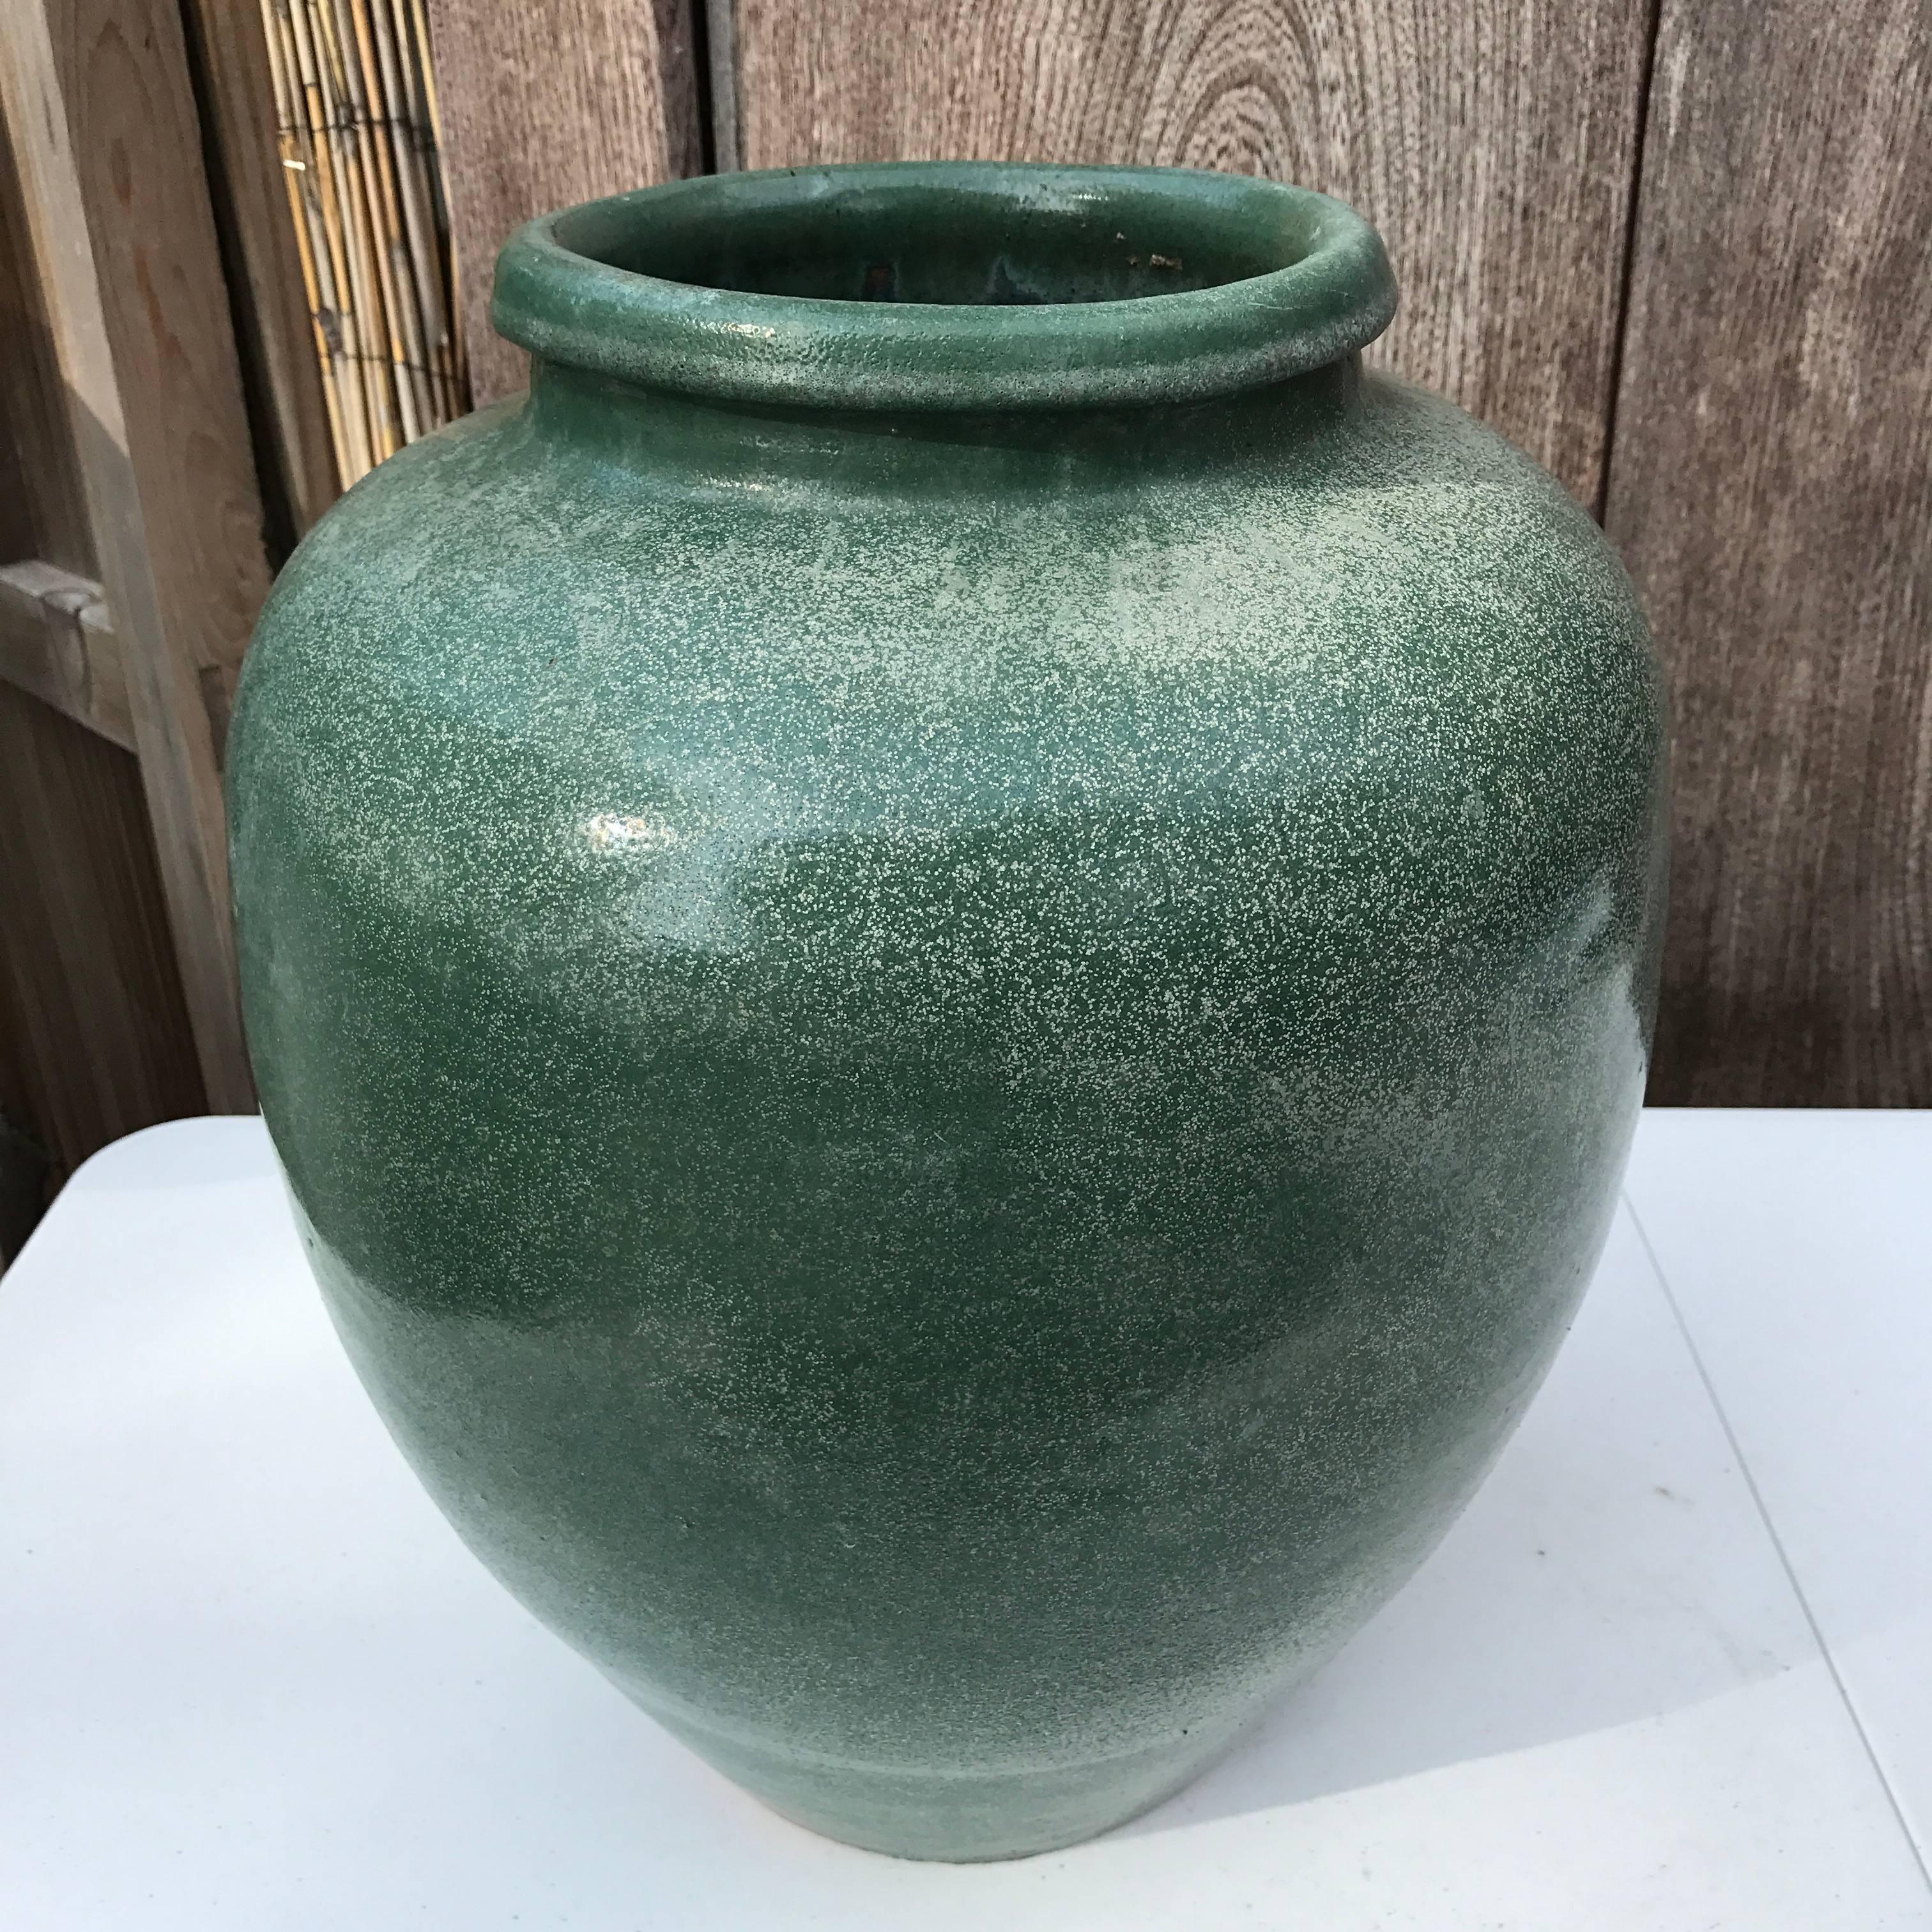 Showa Japan Old Handmade Hand-Painted One-of-a-Kind Green Thick Stone Ware Vessel